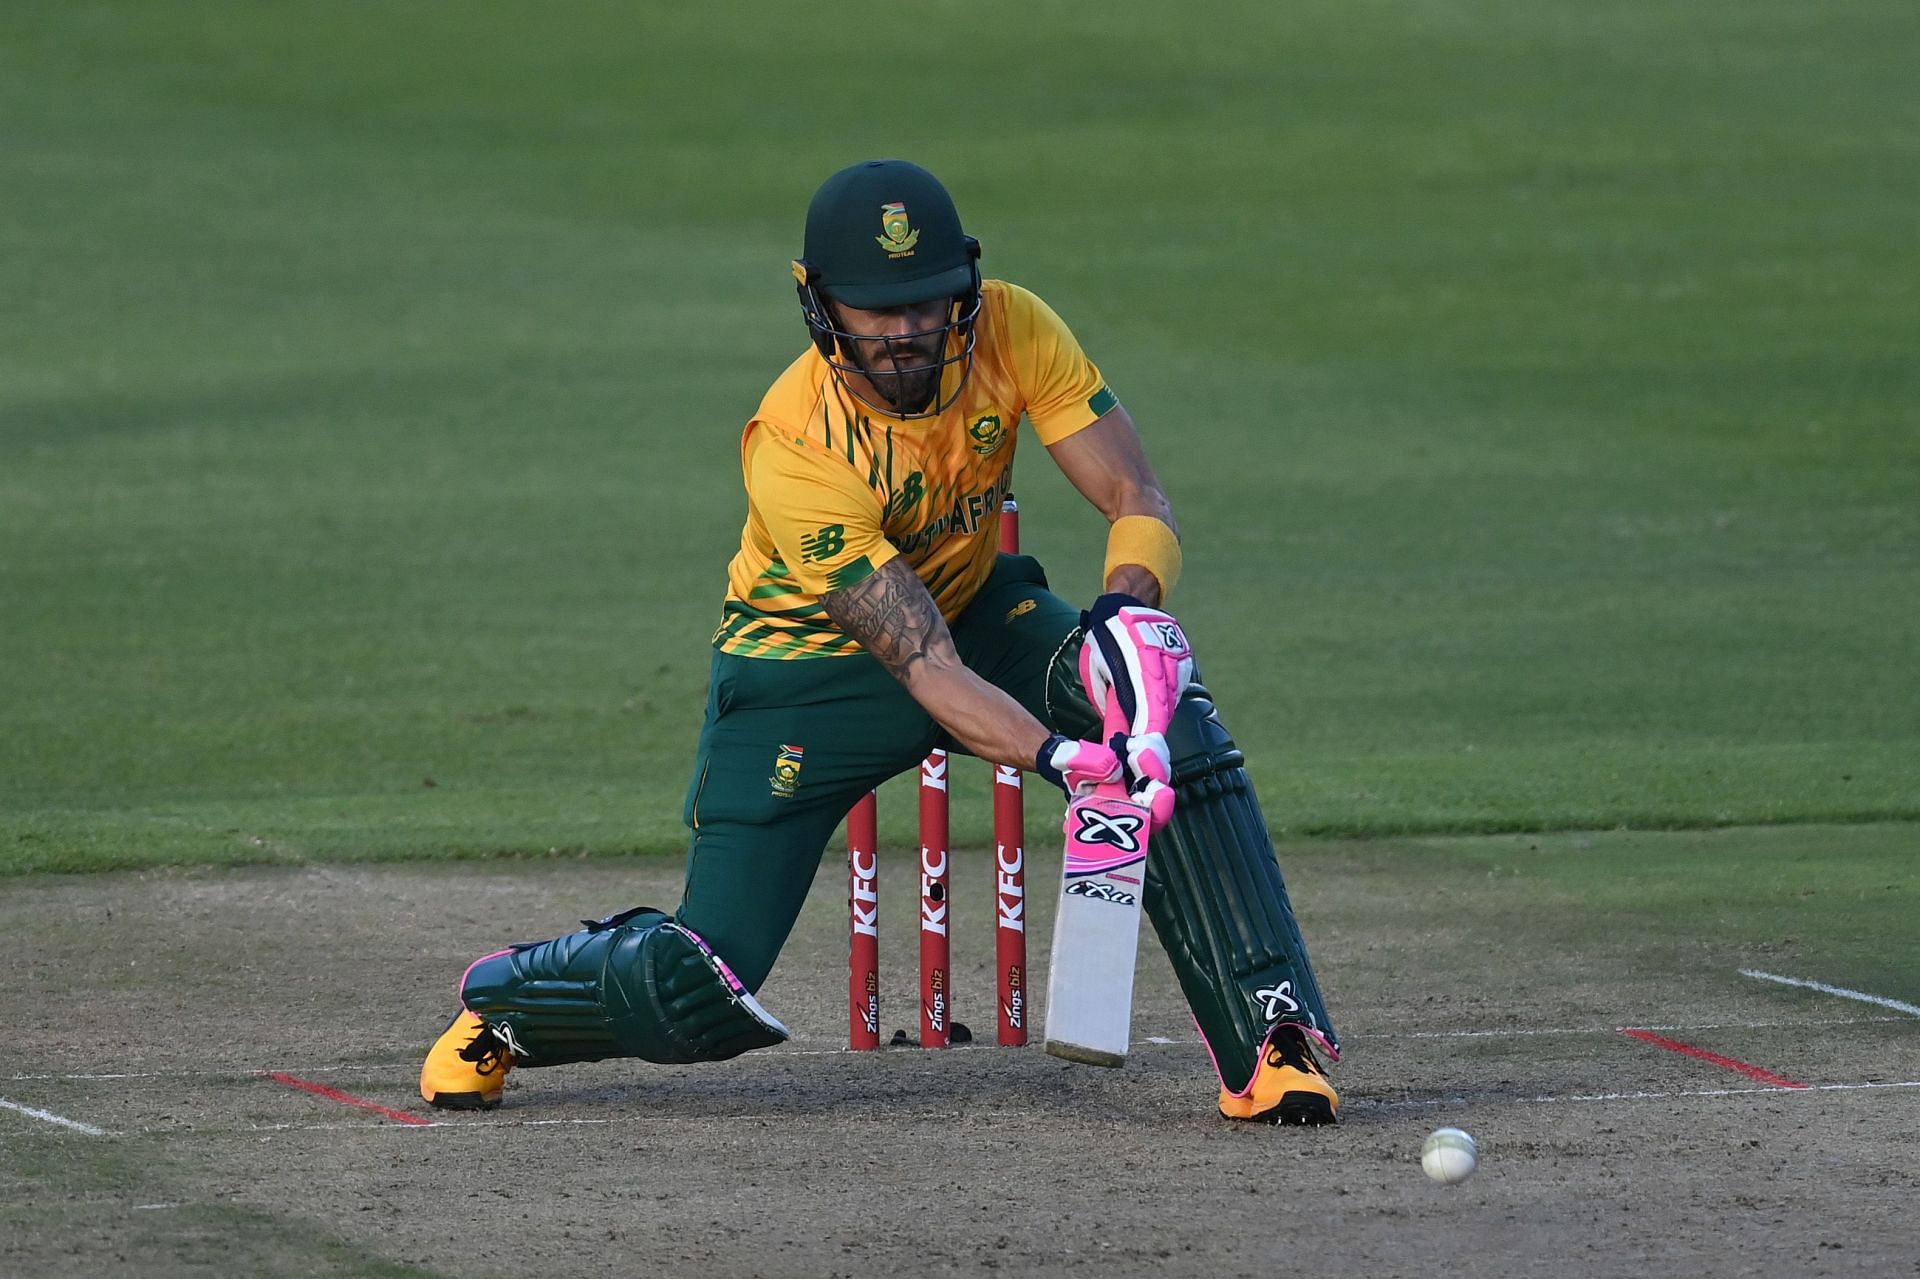 “Faf is still playing well at the age of 37” - Former South African pacer urges selectors to consider Du Plessis for T20 World Cup 2022